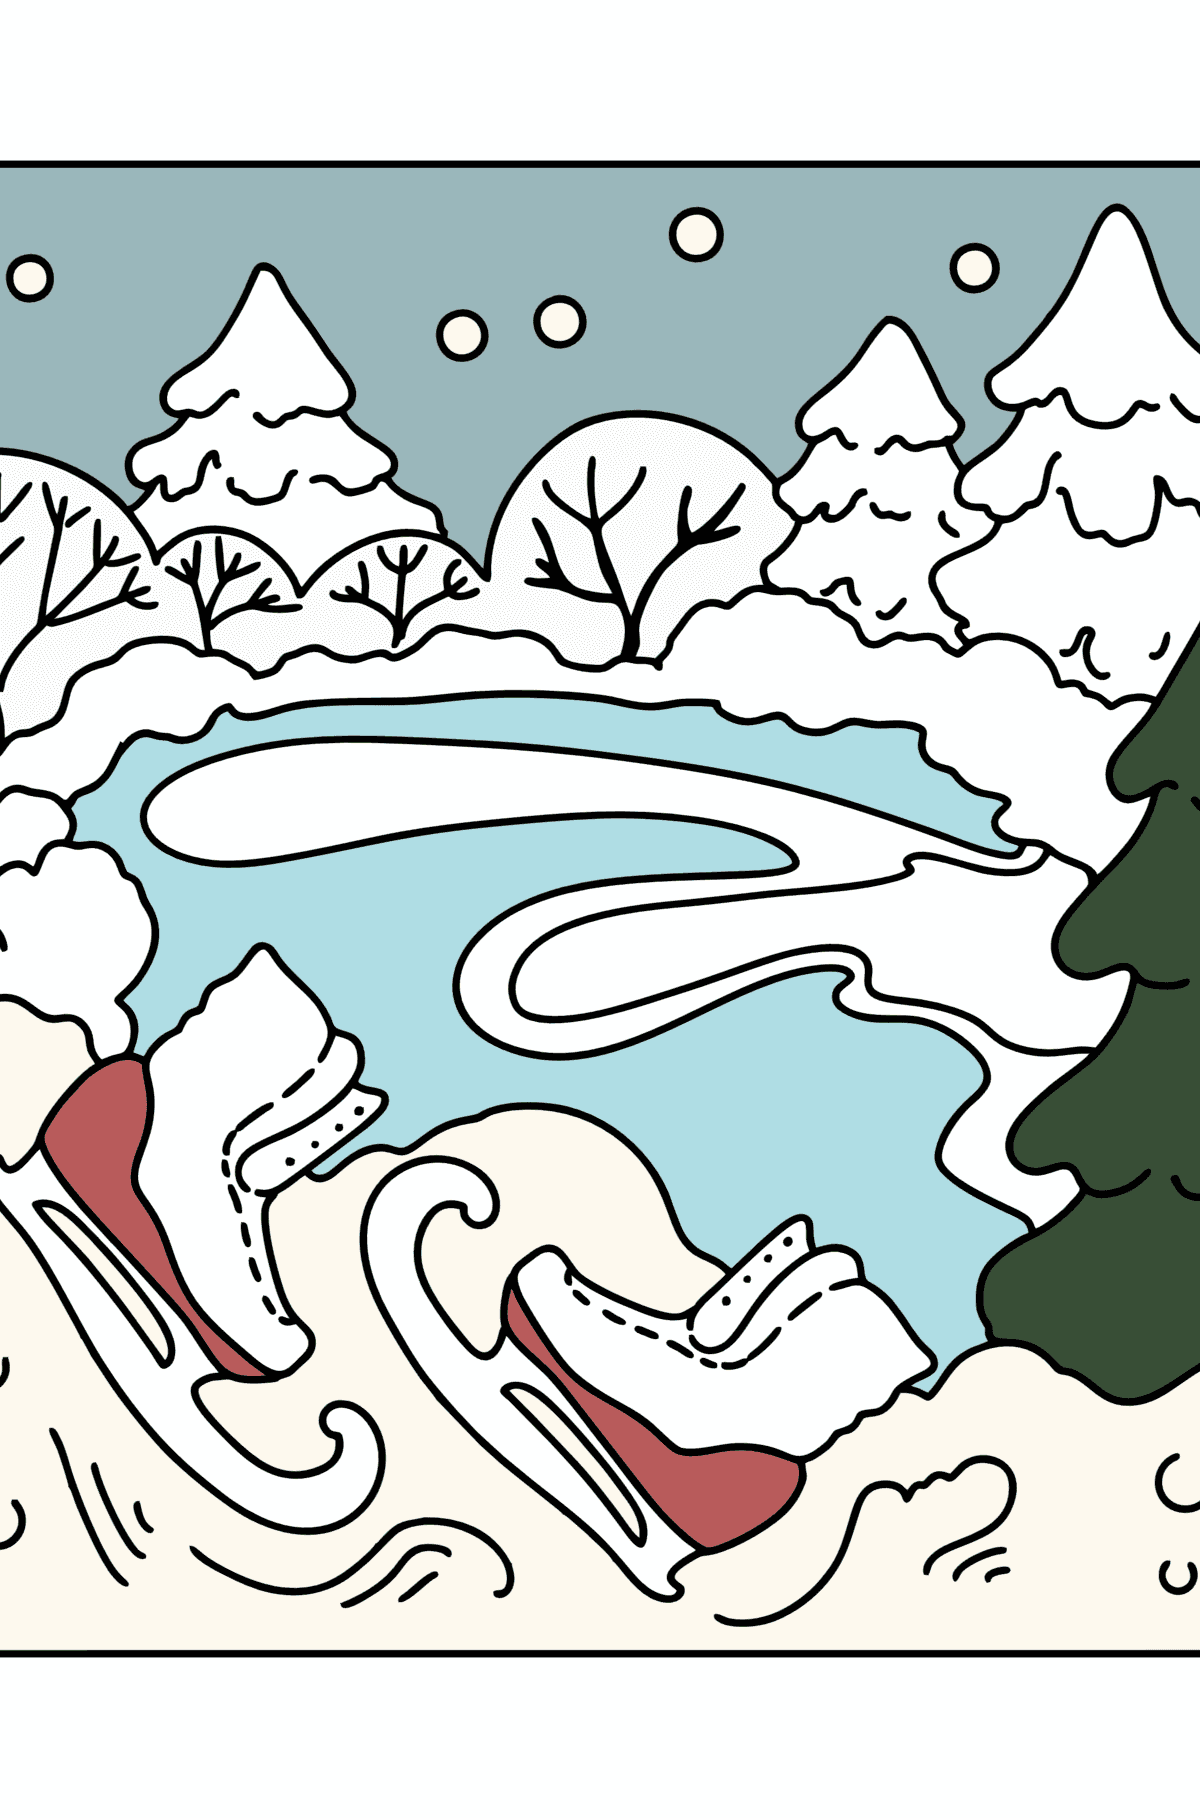 Coloring page - Winter and skates - Coloring Pages for Kids